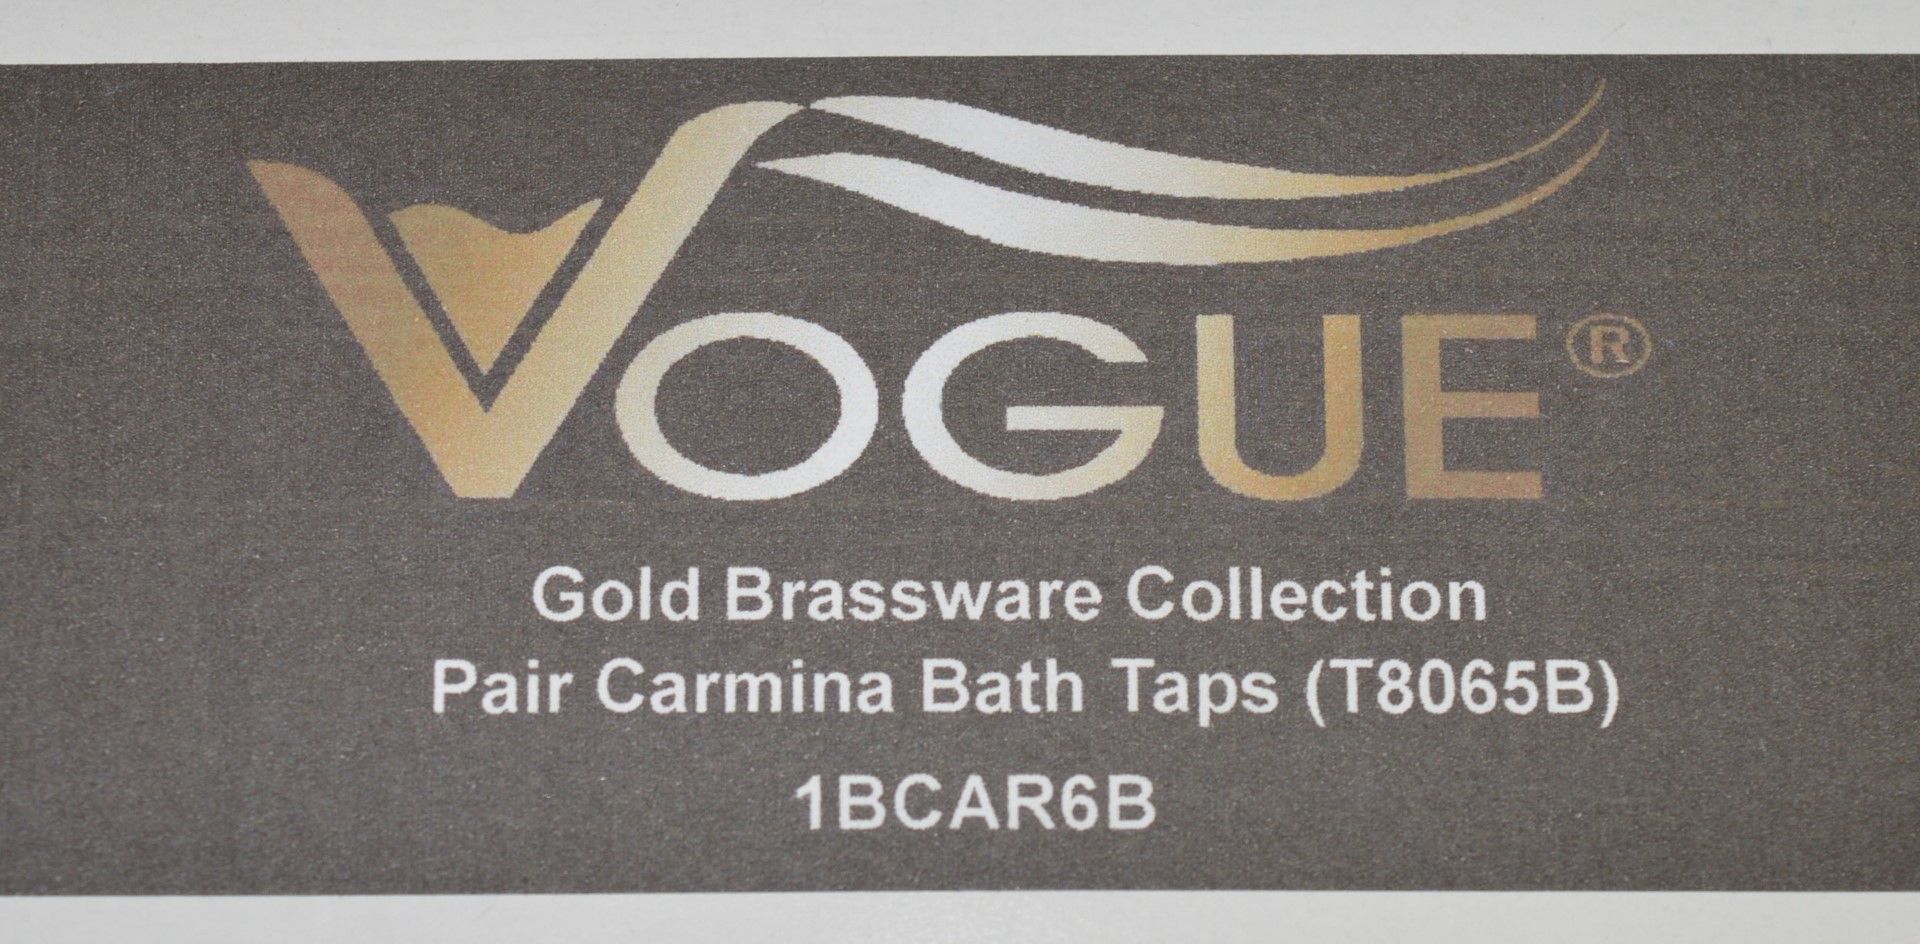 1 x Vogue Carmina Bath Taps - Pair Of - Vogue Bathrooms Gold Brassware Collection - High Quality - Image 4 of 6